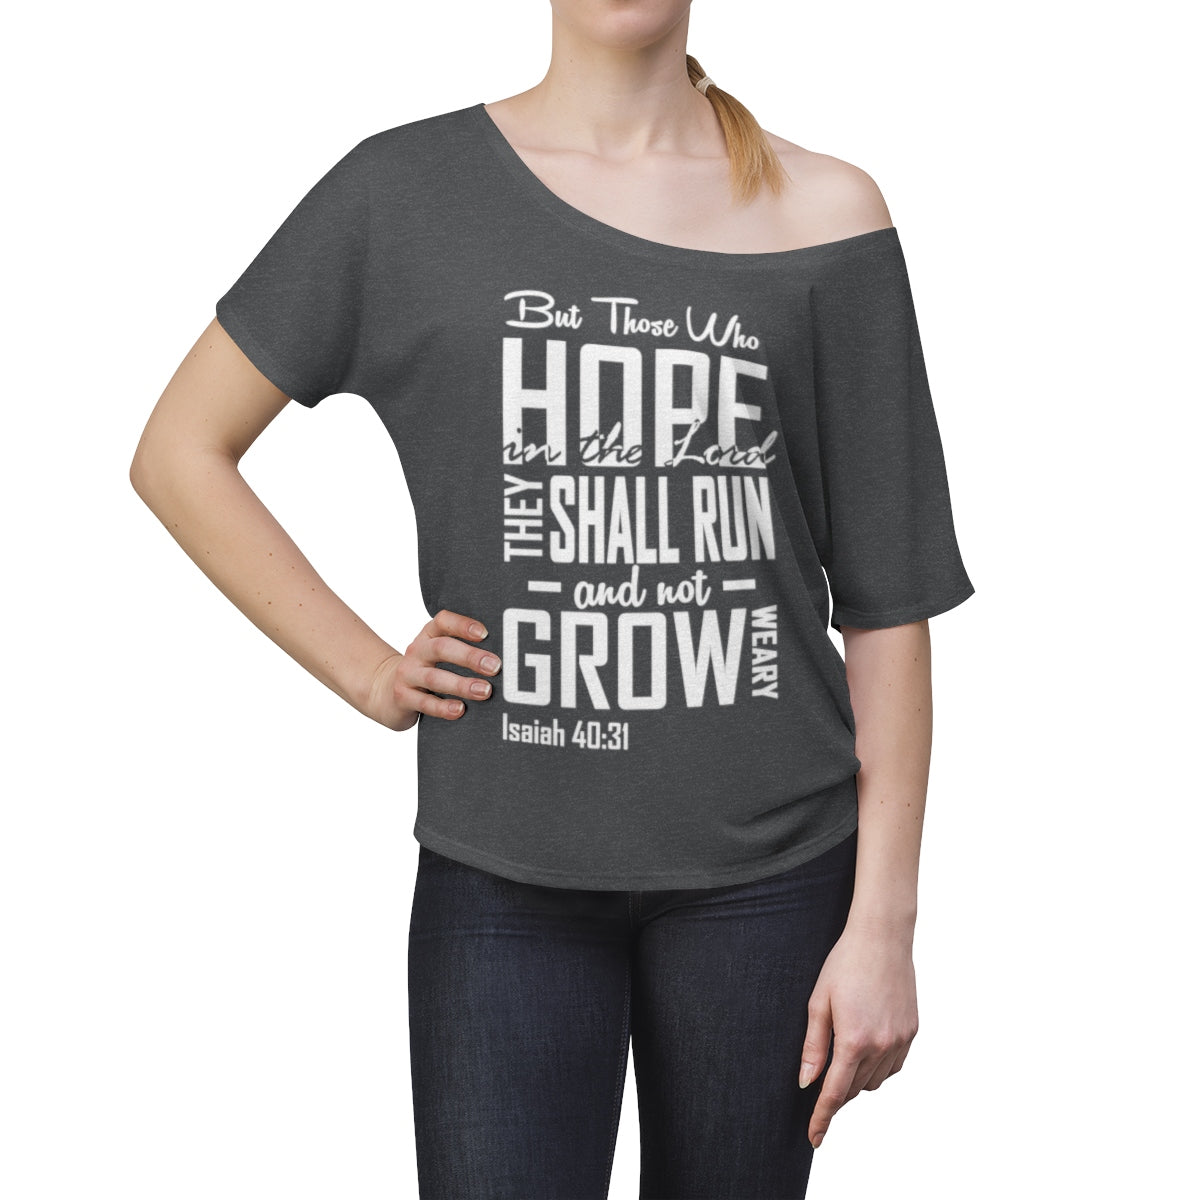 They Shall Run & Not Grow Weary Isaiah 40:31 Christian Slouchy Top